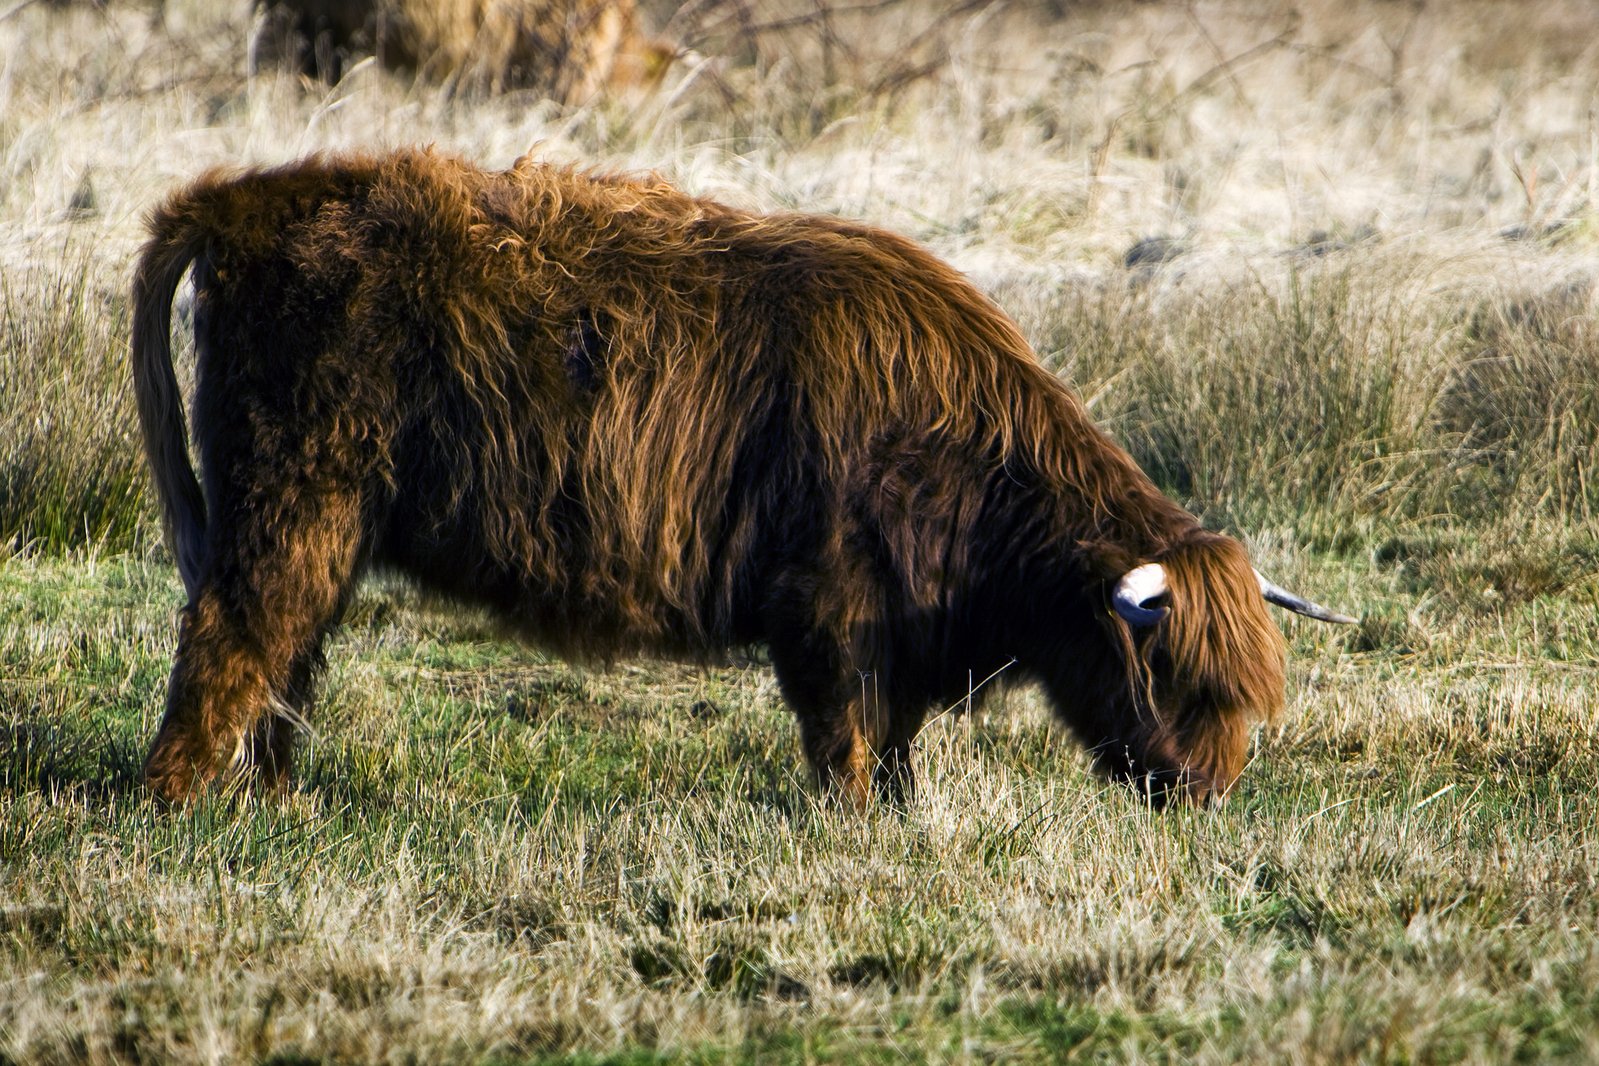 an image of a bison grazing in the field